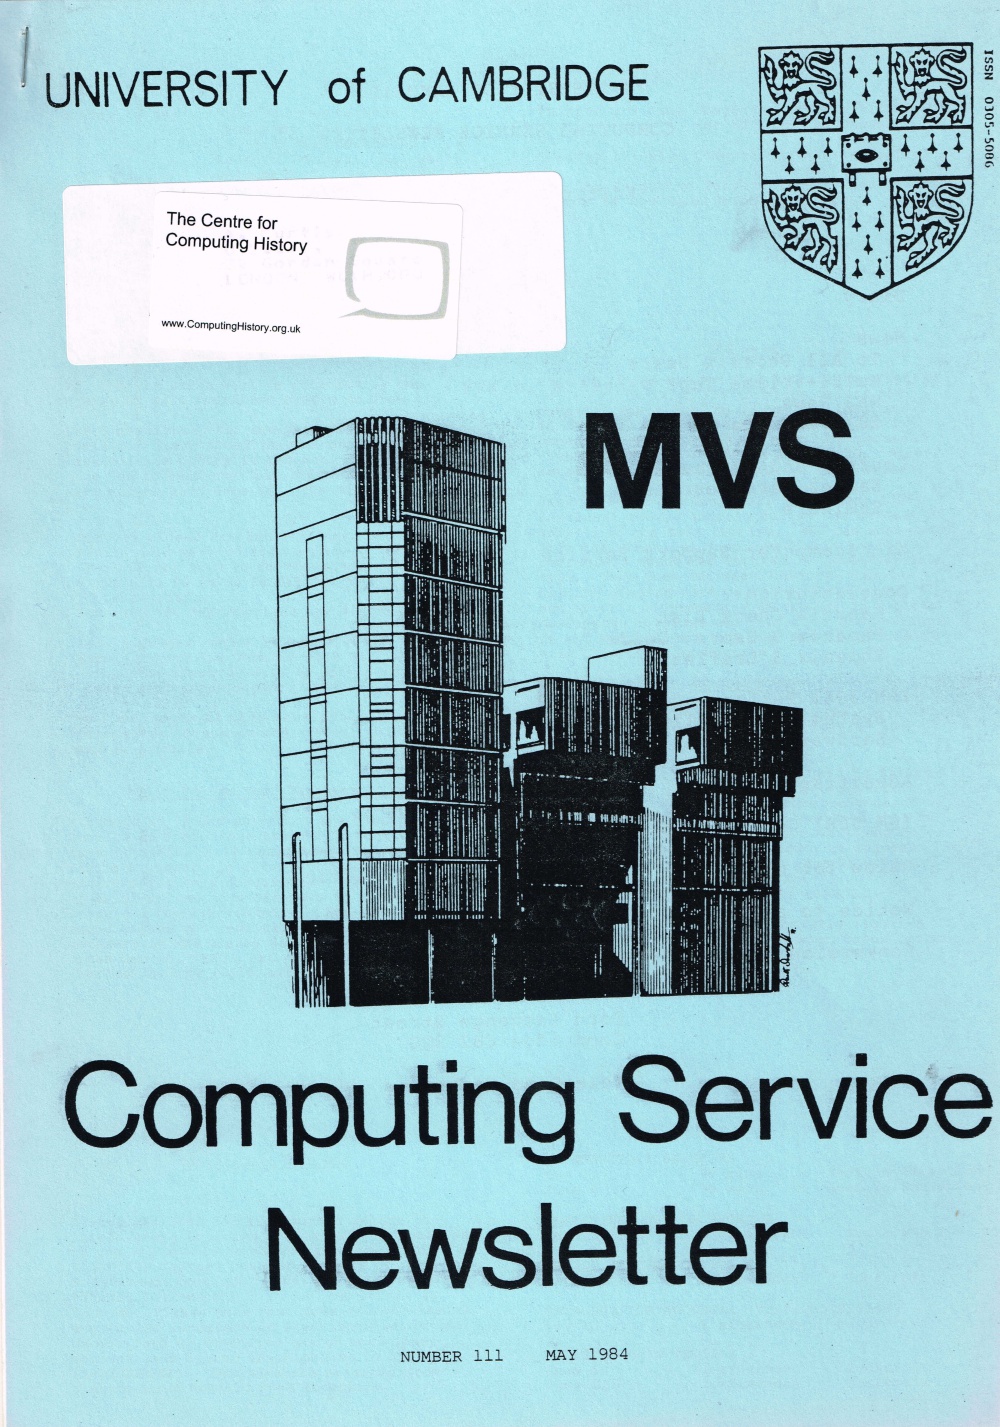 Article: University of Cambridge Computing Service May 1984 Newsletter 111